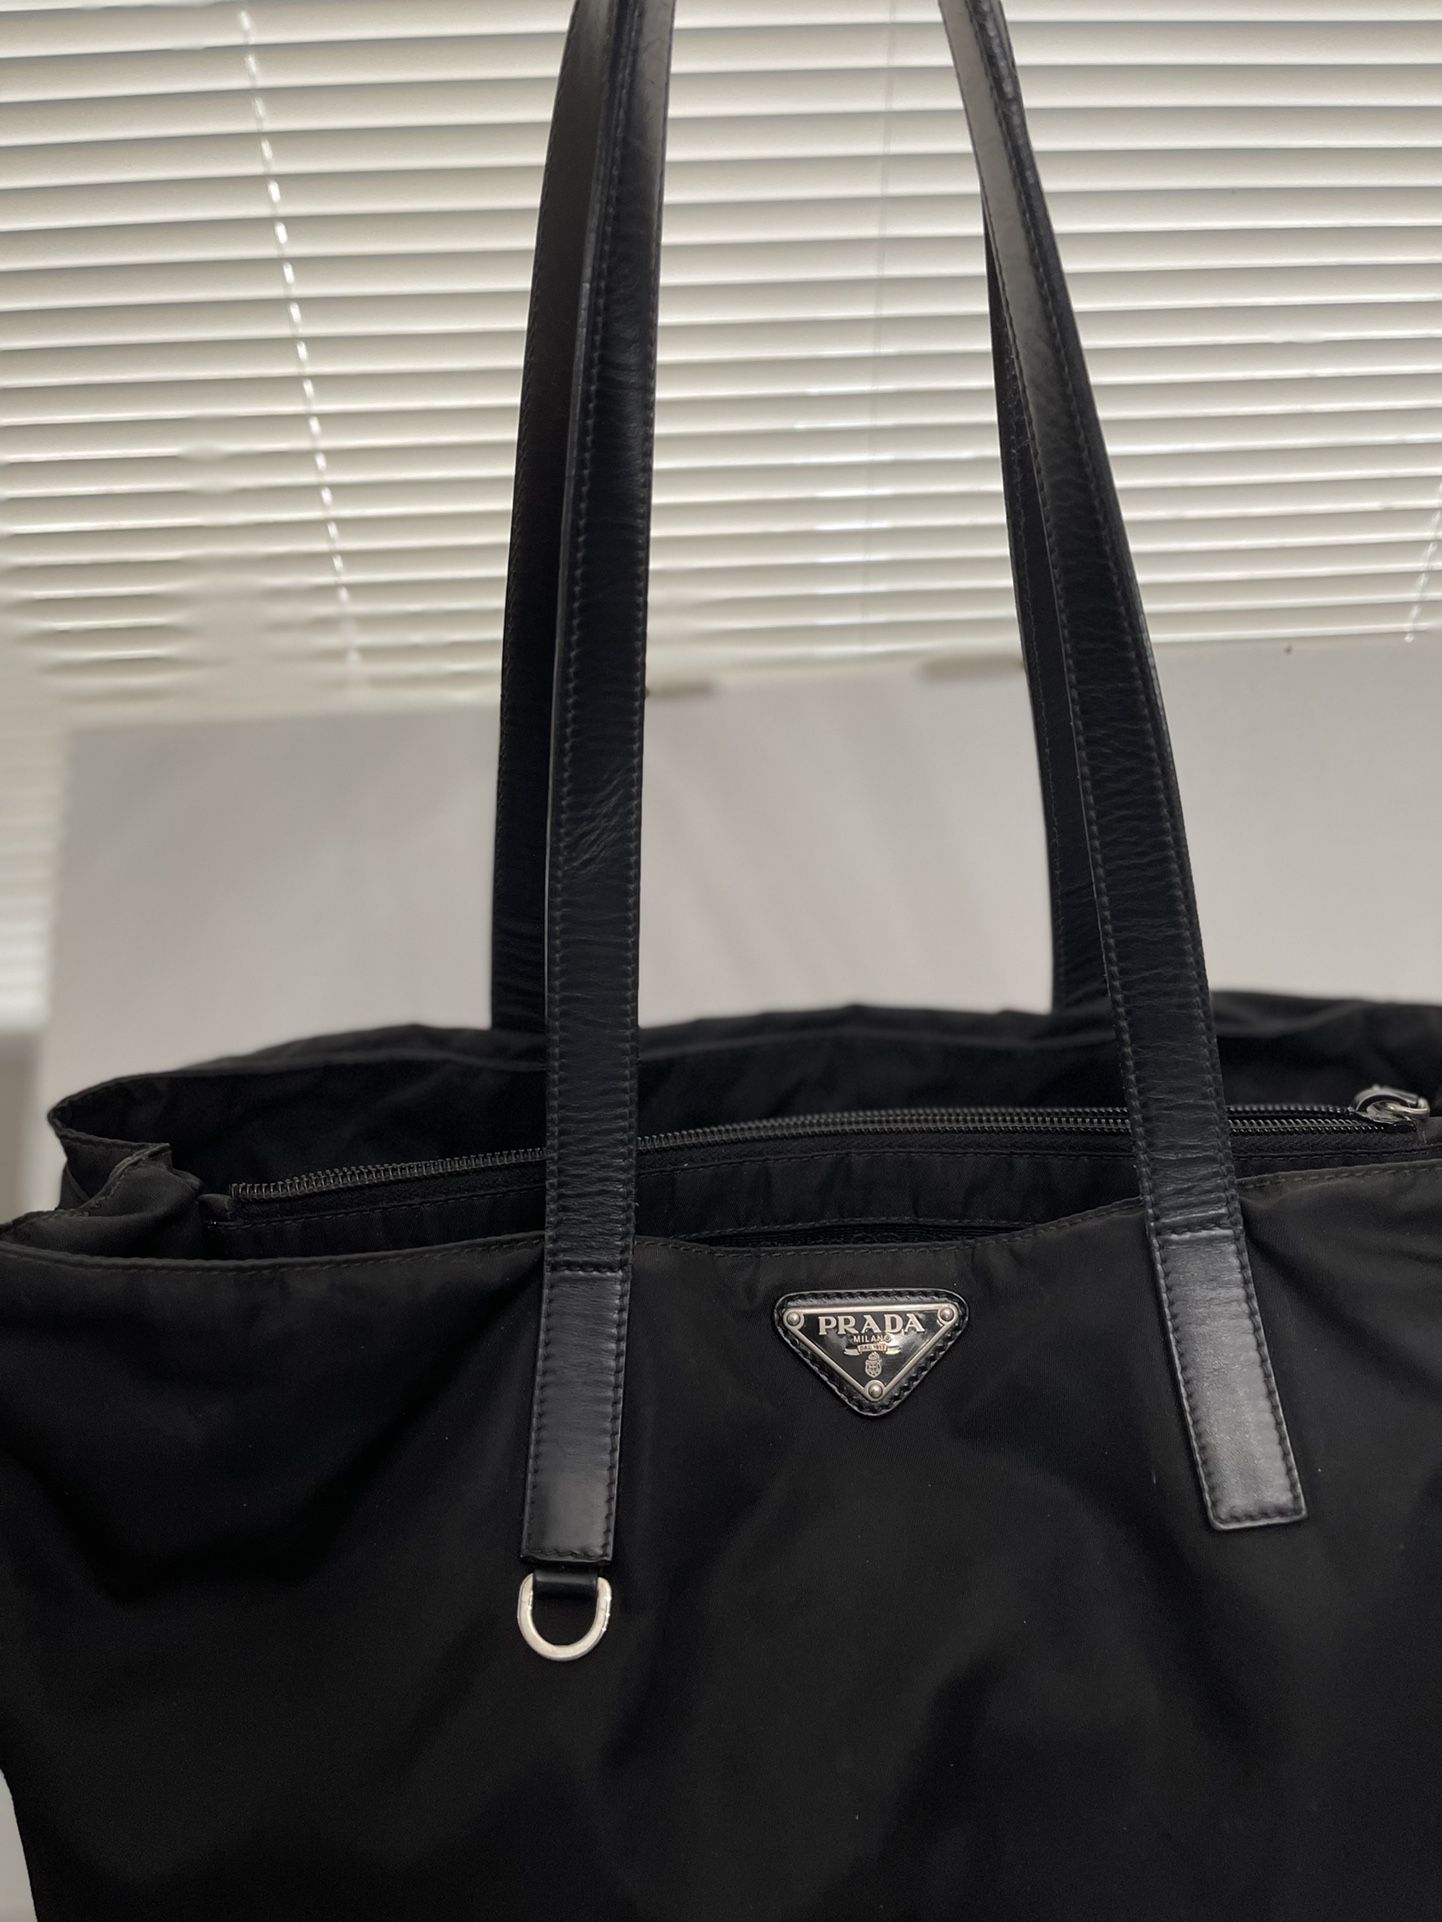 Authentic Prada Nylon Tote Bag With Authenticity Card for Sale in Oxnard,  CA - OfferUp